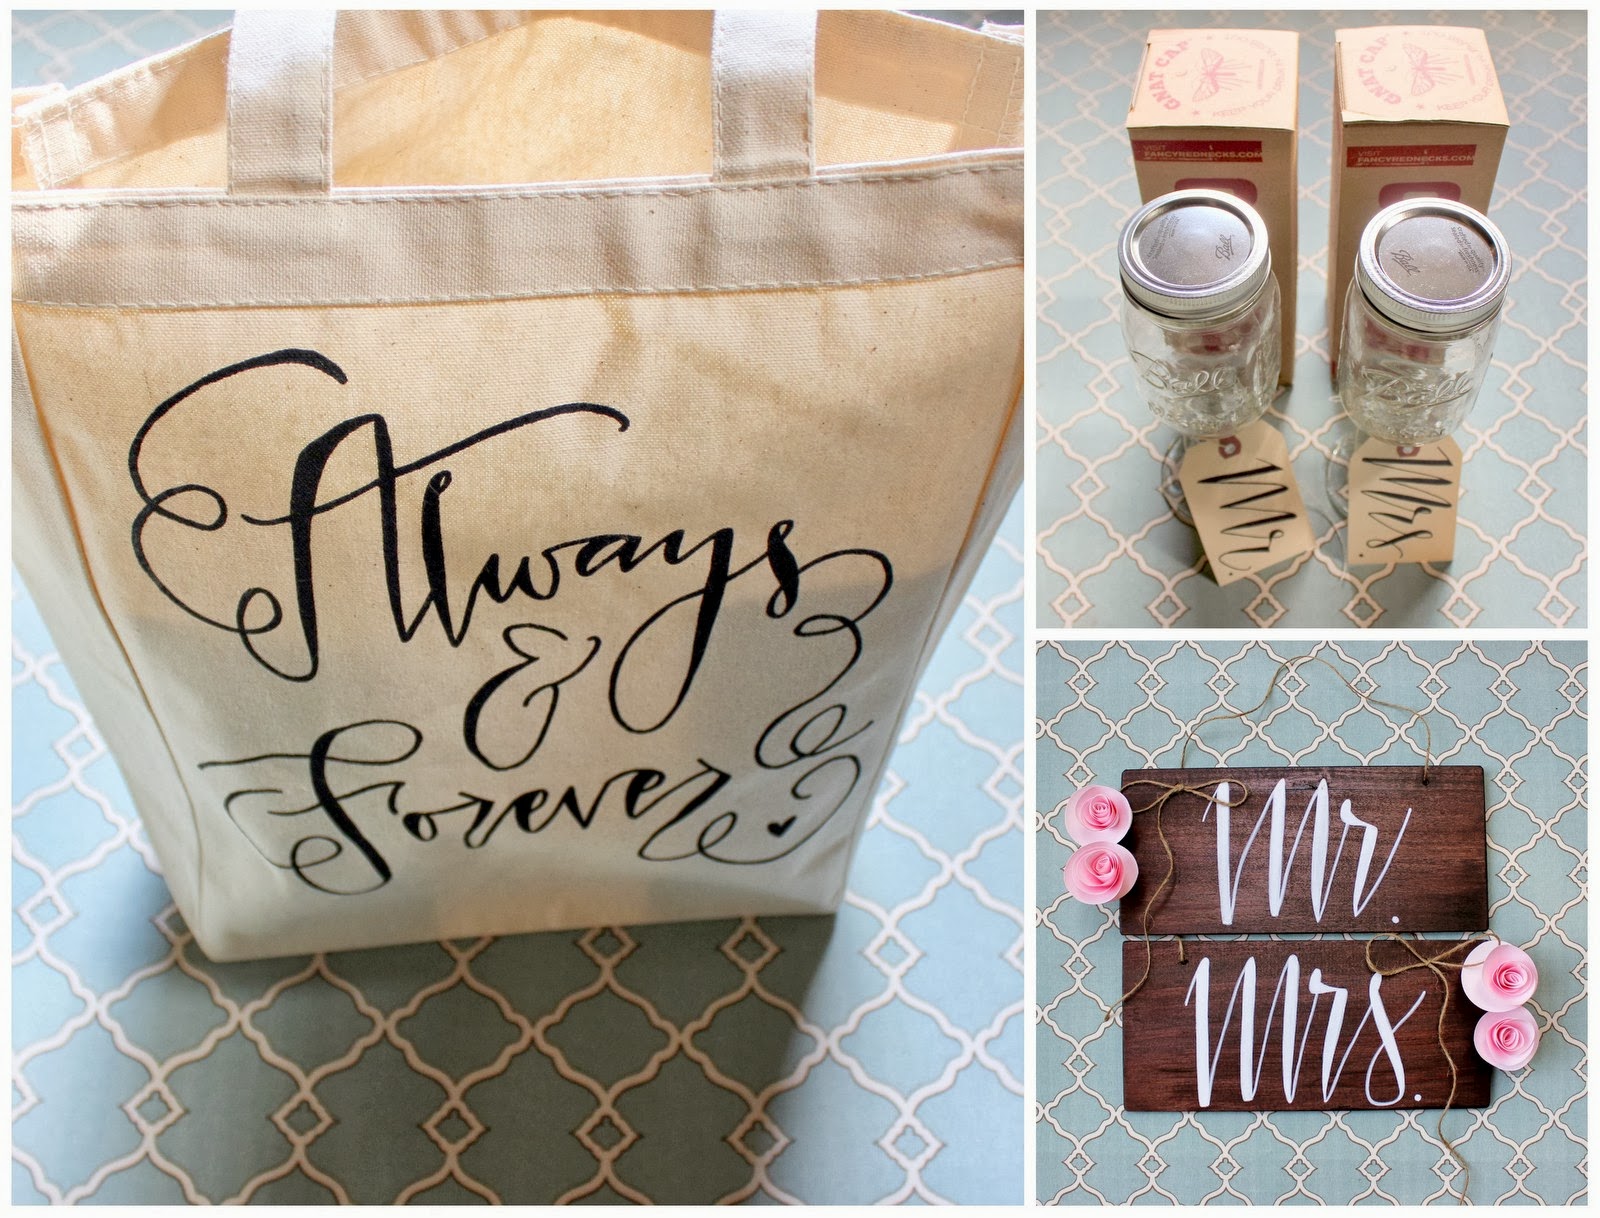 Dream State: Dan & Brittney's Engagement Party & Gift Ideas